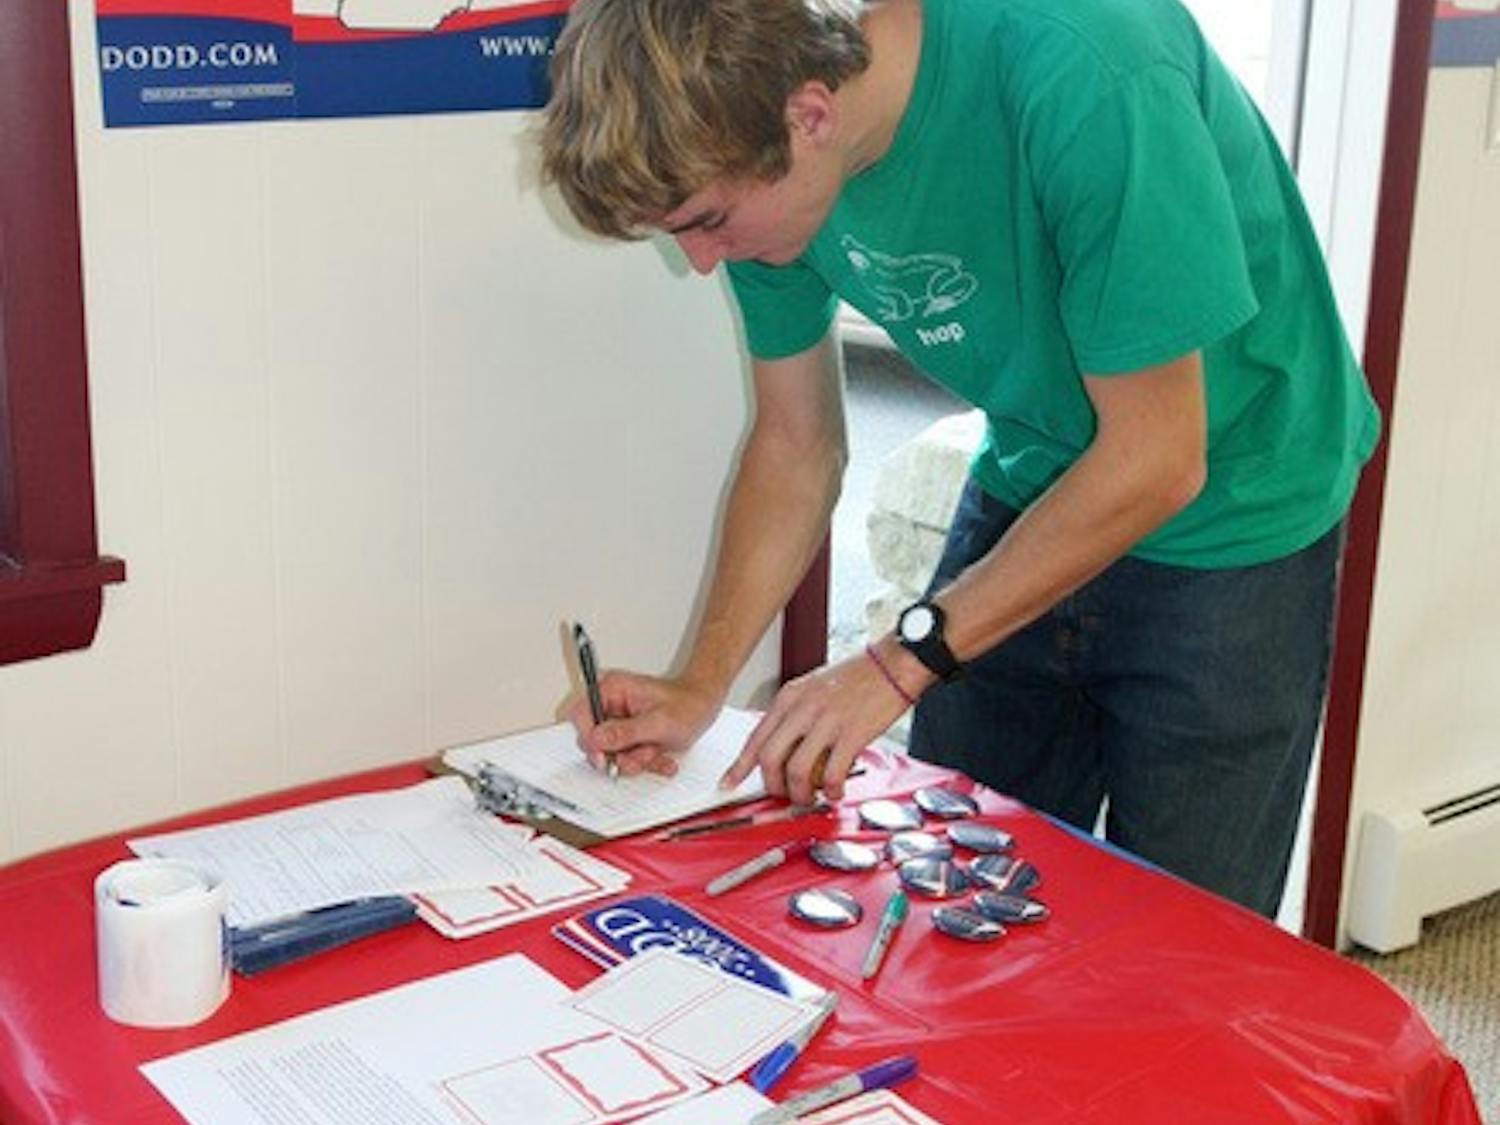 Zach Mayer '08 signs in at the local office opening for presidential hopeful Sen. Chris Dodd, D-Conn., in West Lebanon on Friday, Sept. 21.